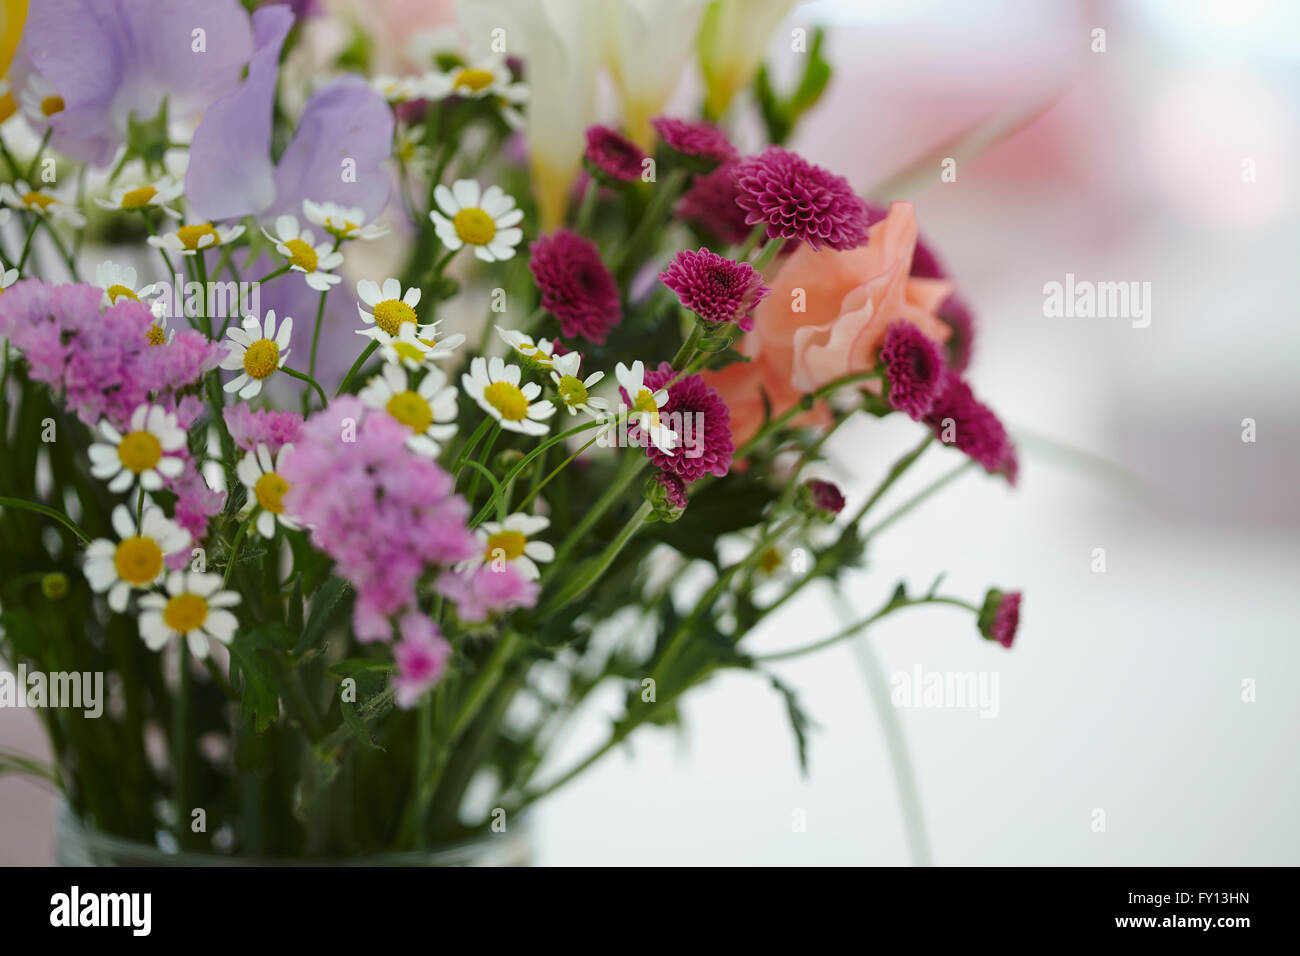 Close-up of flowers in vase on table Stock Photo